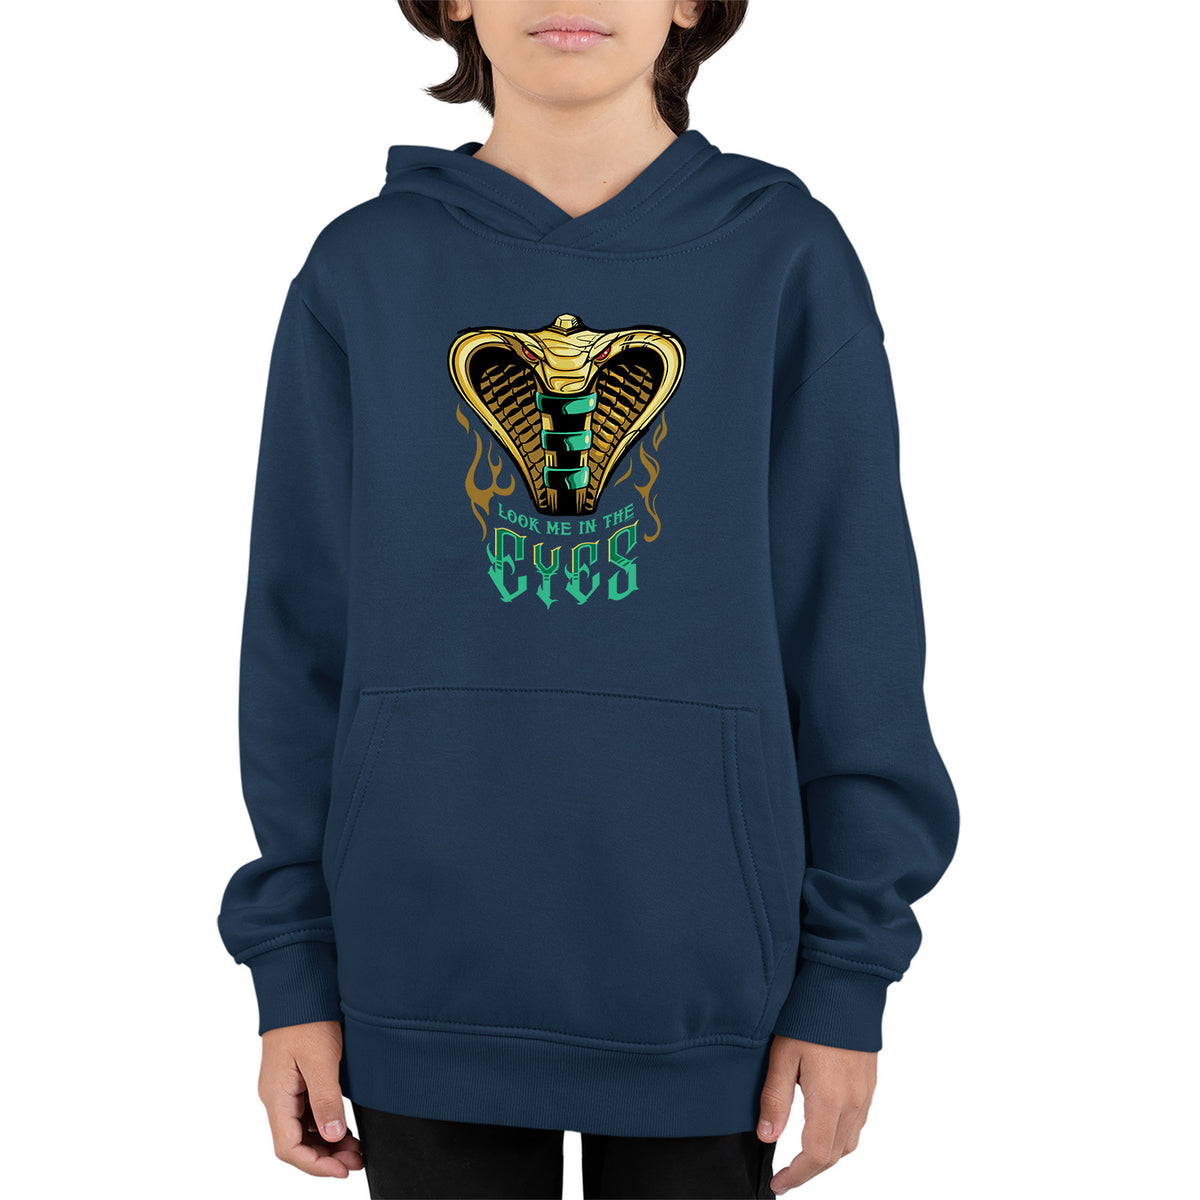 Aladdin Look Me In The Eyes | Disney Kids Pullover Hoodie Chroma Clothing